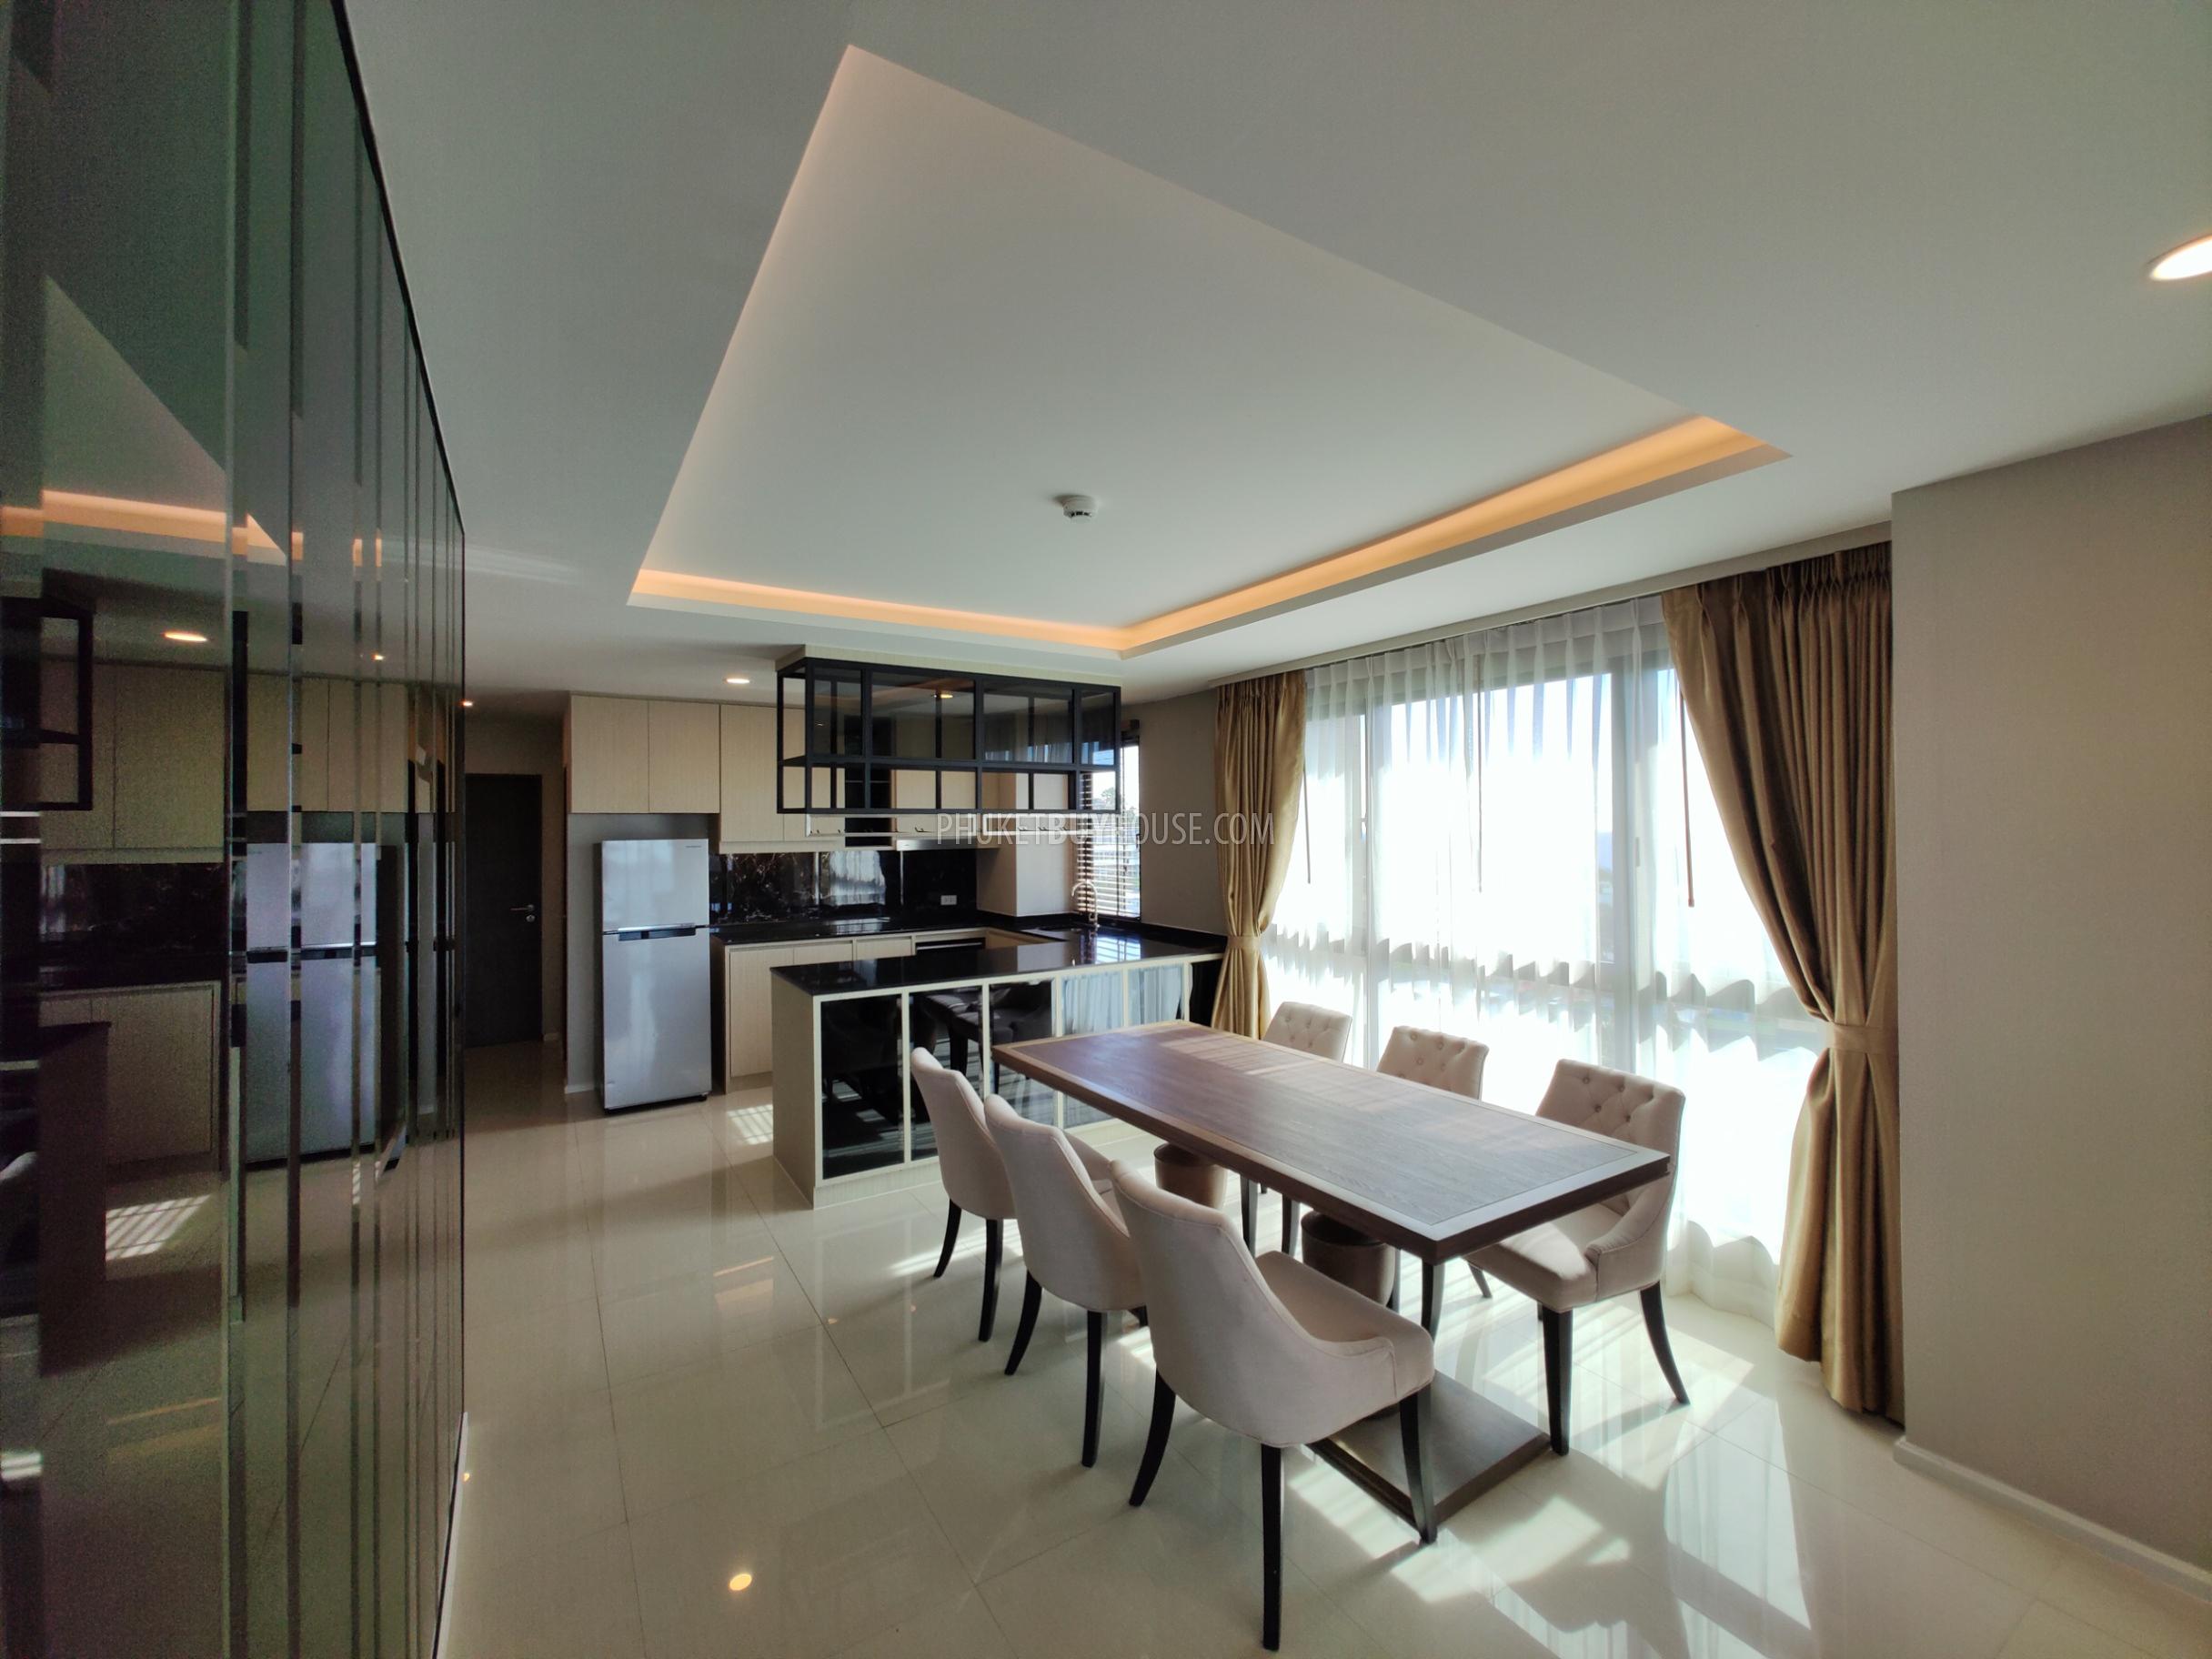 SUR22000: Irresistible Panoramic View from This Three Bedroom Apartment in Surin. Photo #17